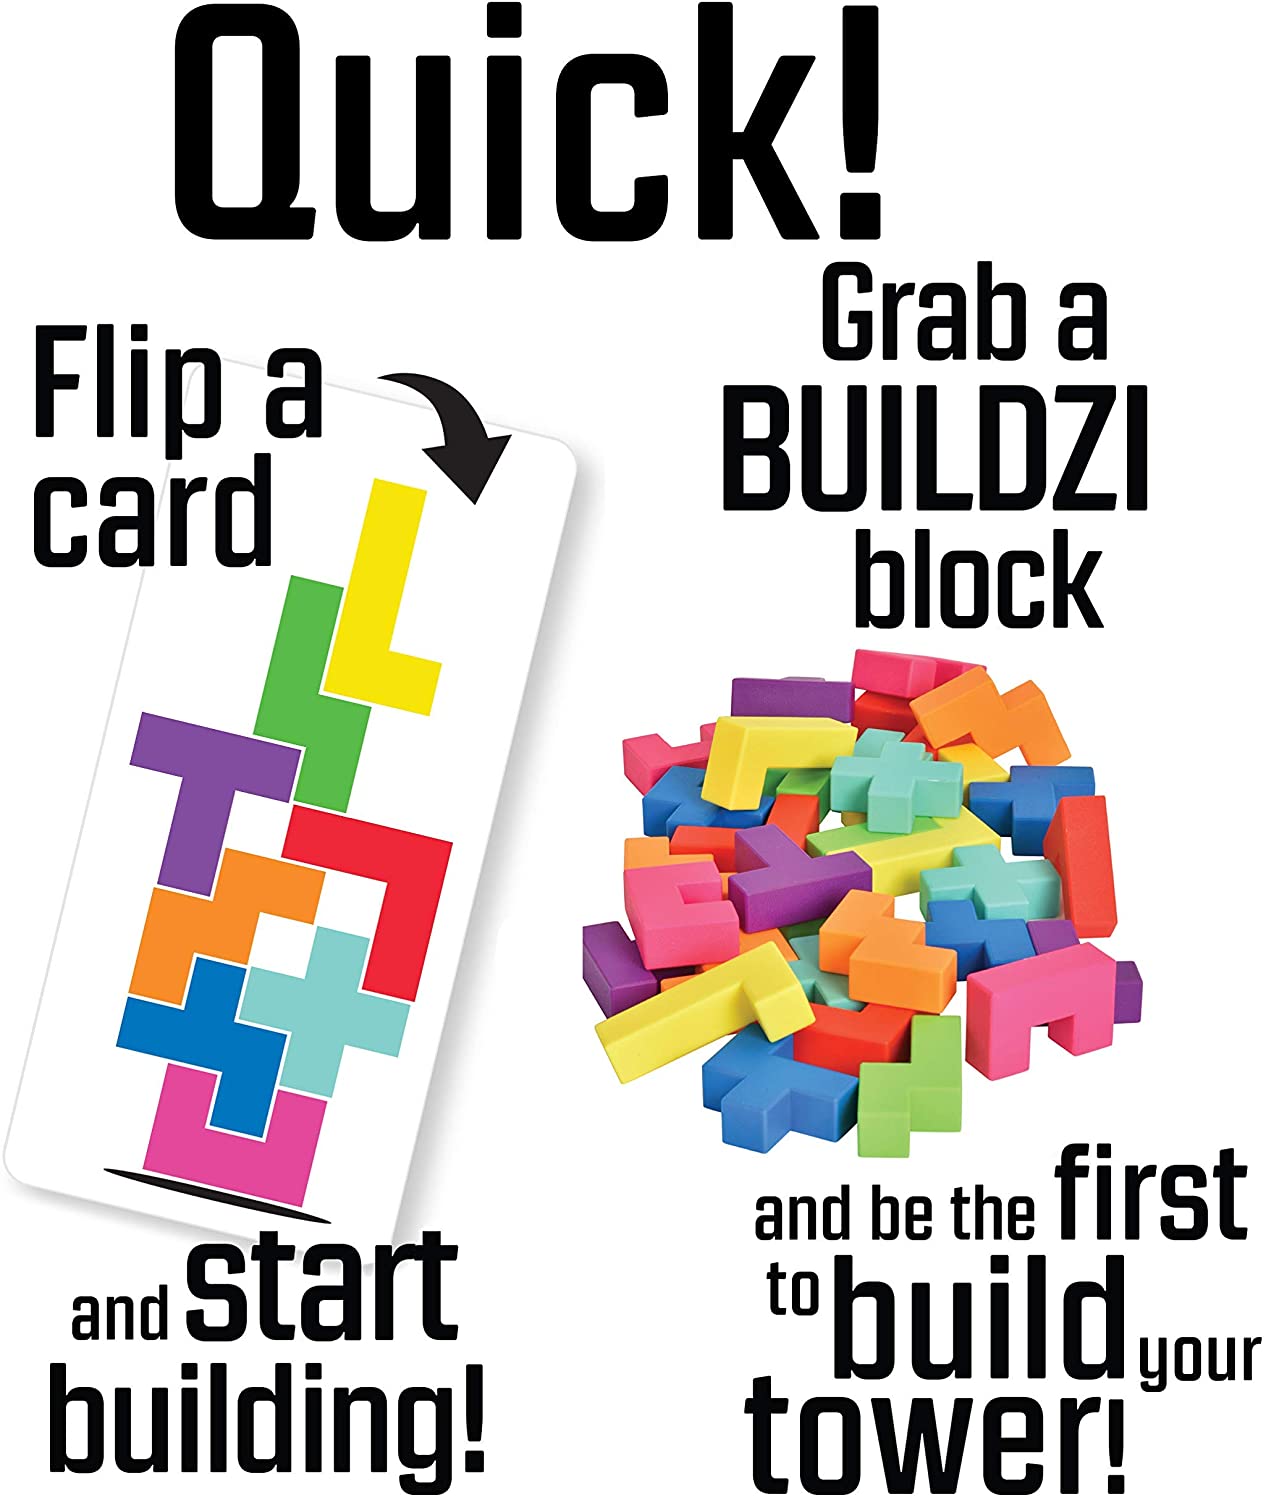 BUILDZI: The Fast-Stacking Block Game